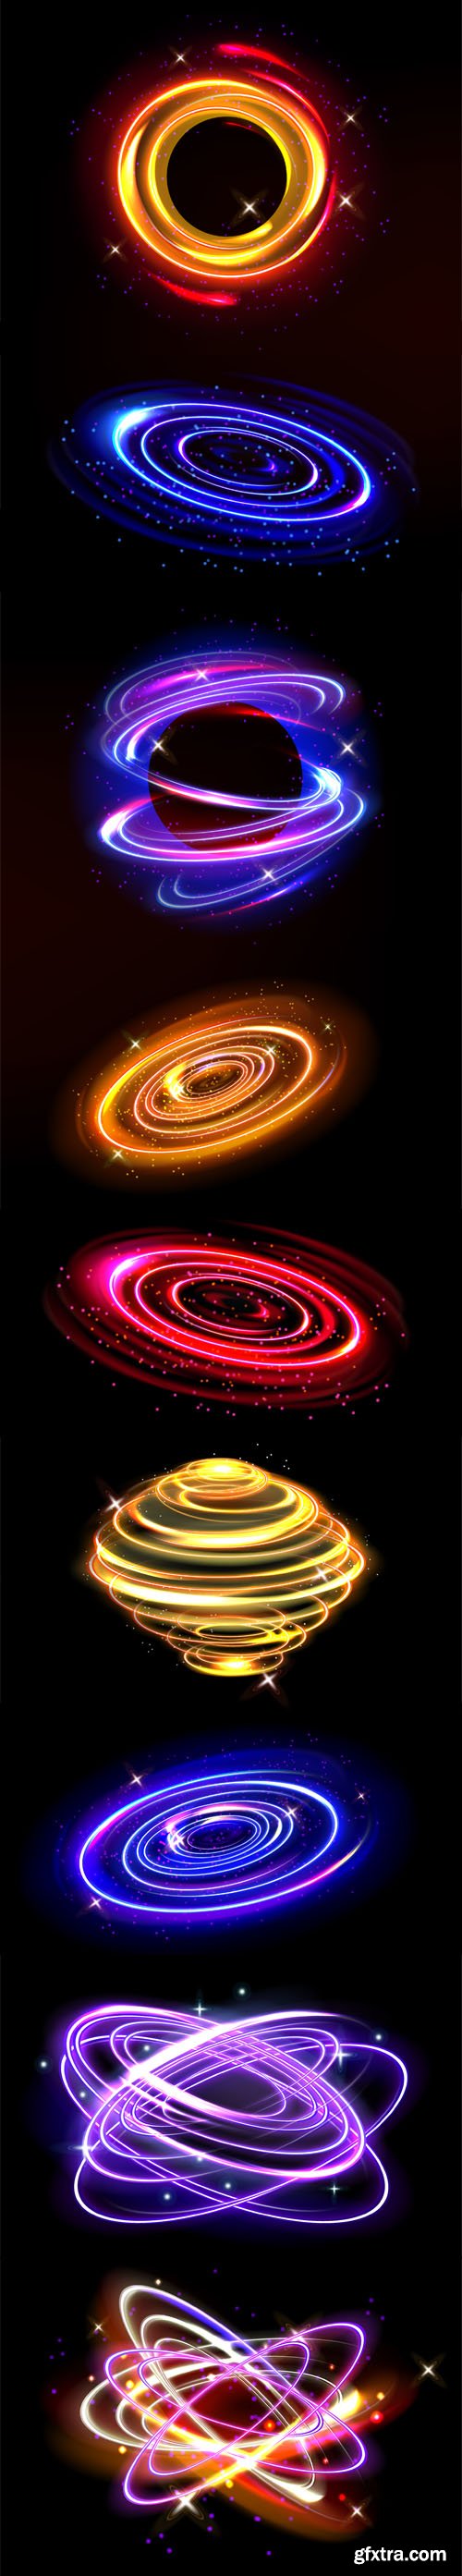 Neon Swirls Effects Vector Templates Collection